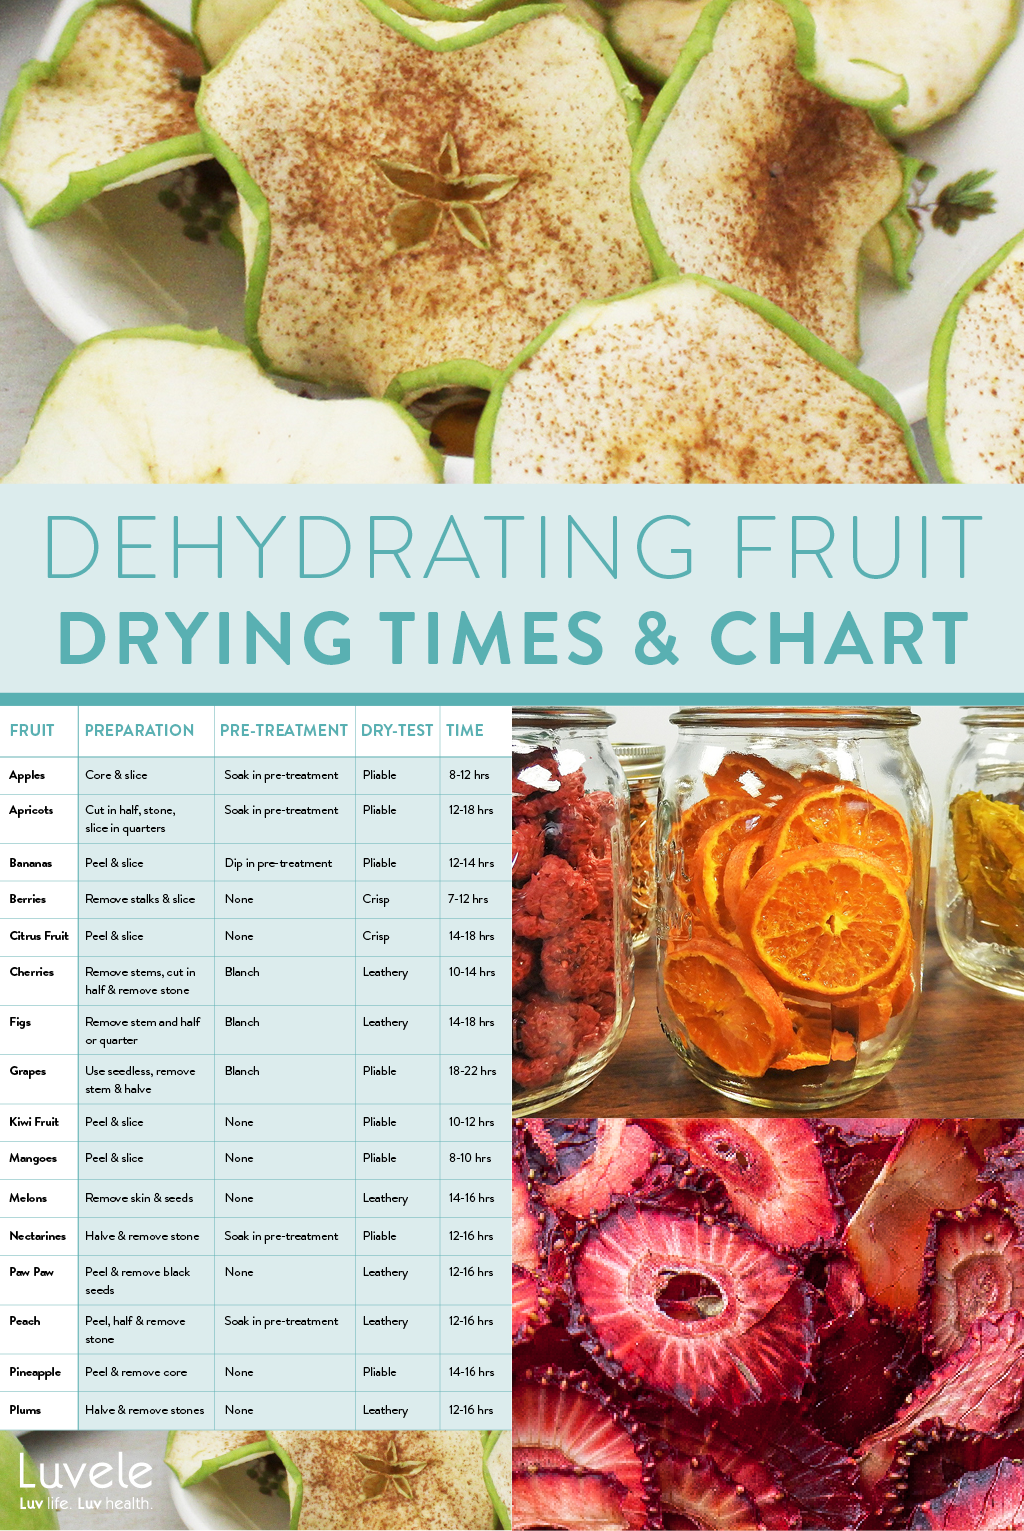 dehydrating-fruit-pretreatment-drying-times-chart-luvele-us